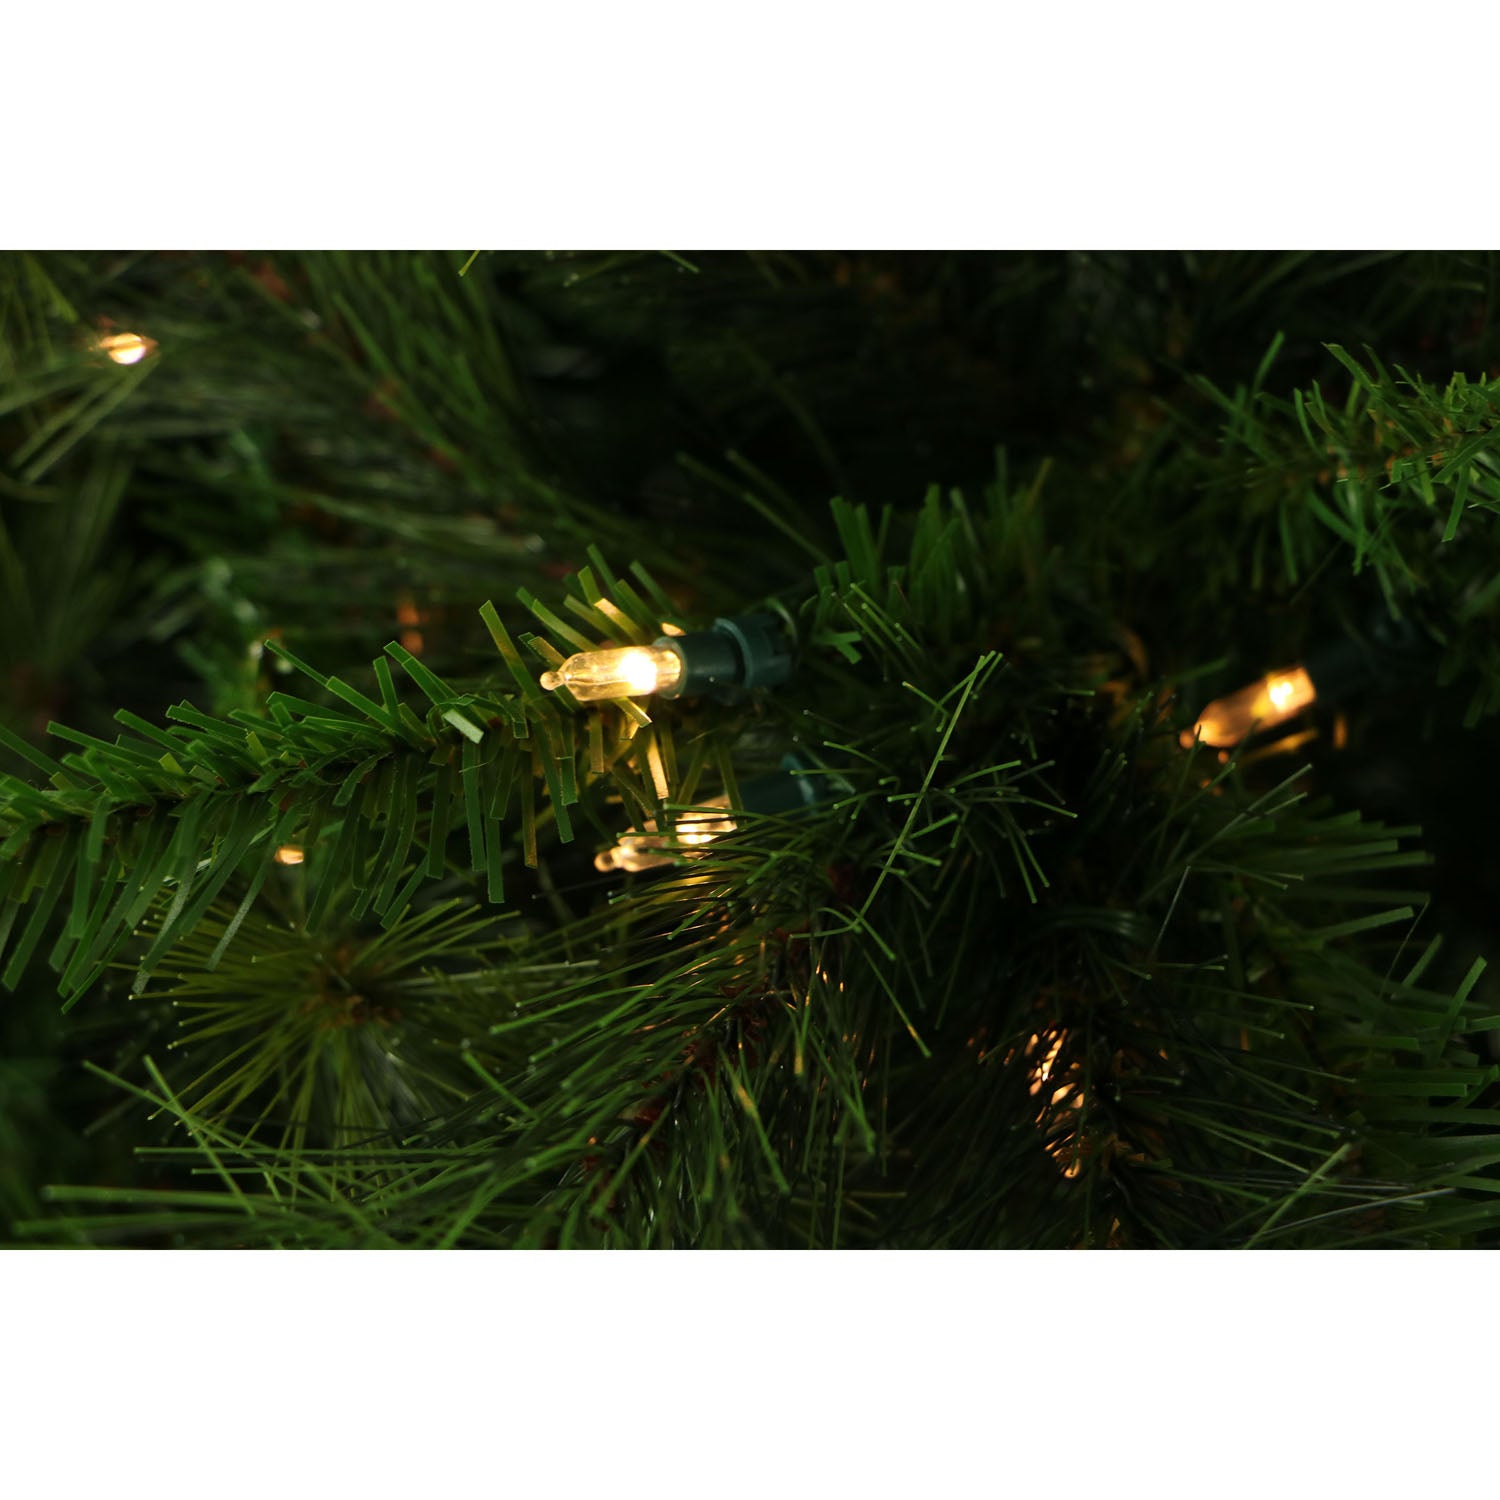 Fraser Hill Farm -  6.5-Ft. Canyon Pine Christmas Tree with Warm White LED Lighting